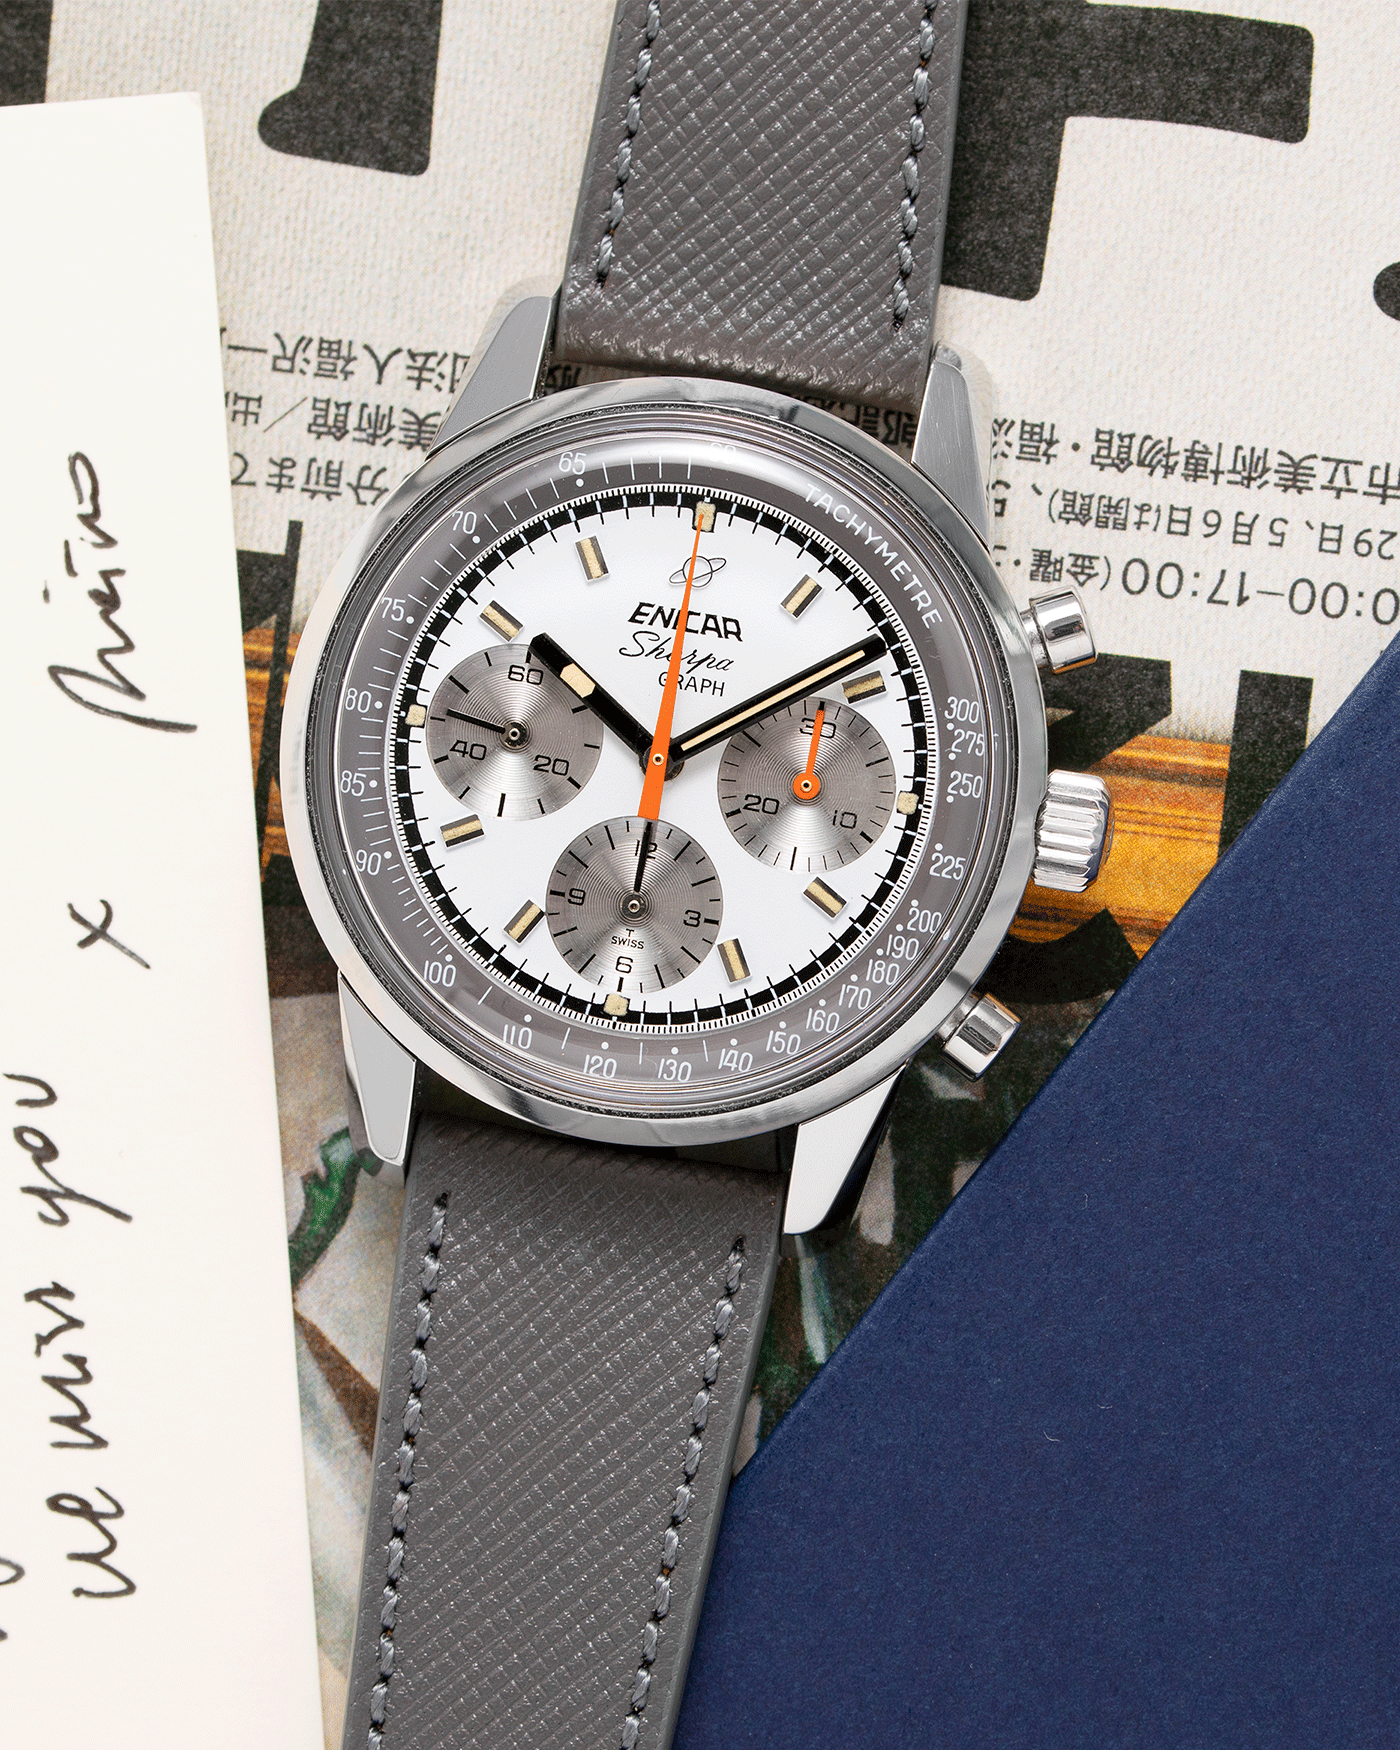 Brand: Enicar Year: 1960s Model: Sherpa Graph Material: Stainless Steel Movement: Valjoux 72 Case Diameter: 40mm Lug Width: 20mm Bracelet/Strap: Grey Molequin Textured Calf Strap